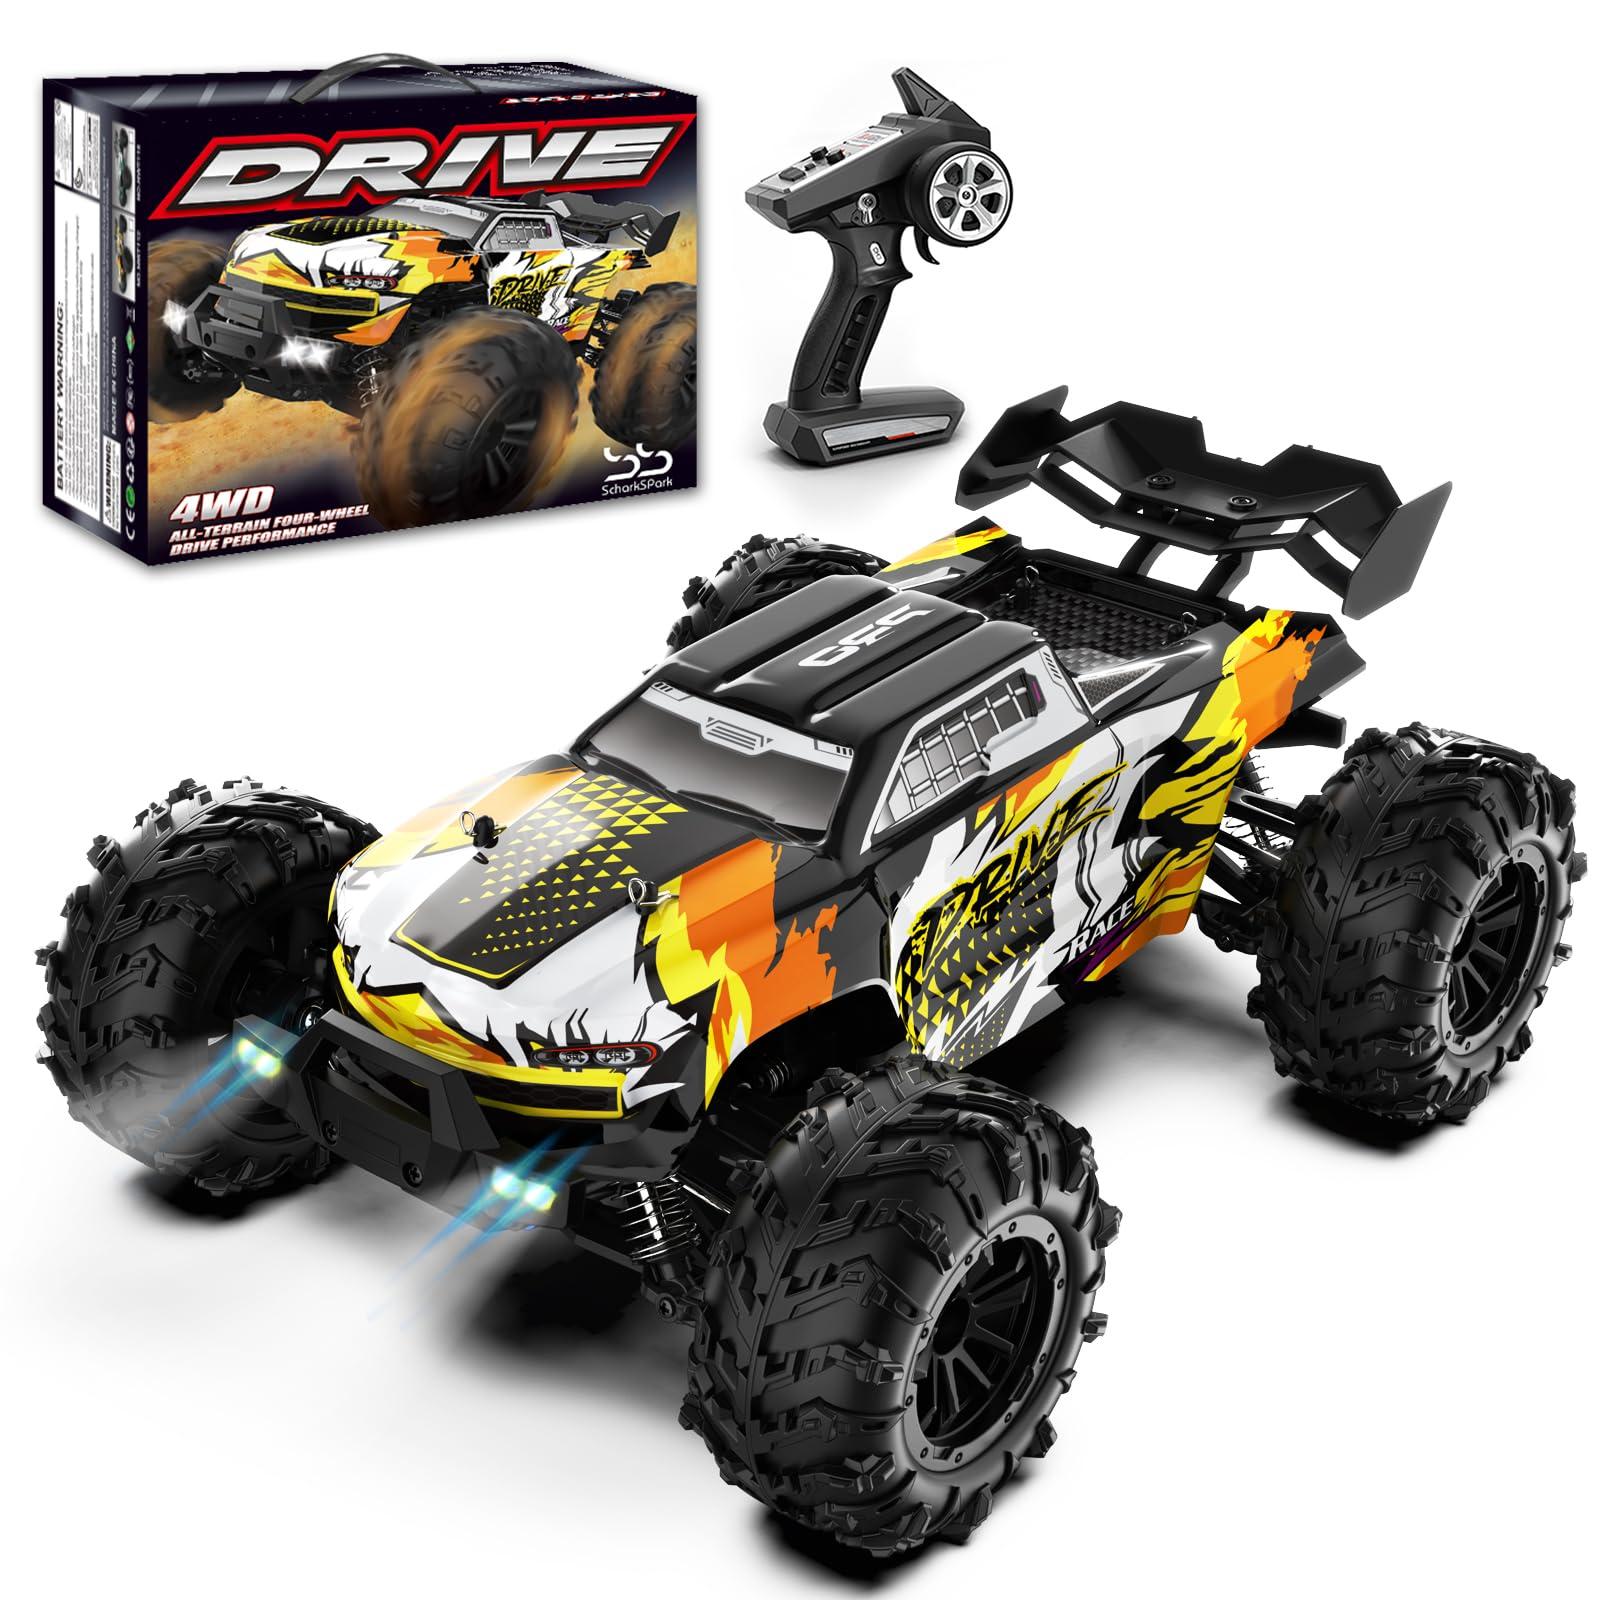 Electric Rc Cars 70 Mph: Electric RC Cars: Growing Popularity and Enthusiastic Community